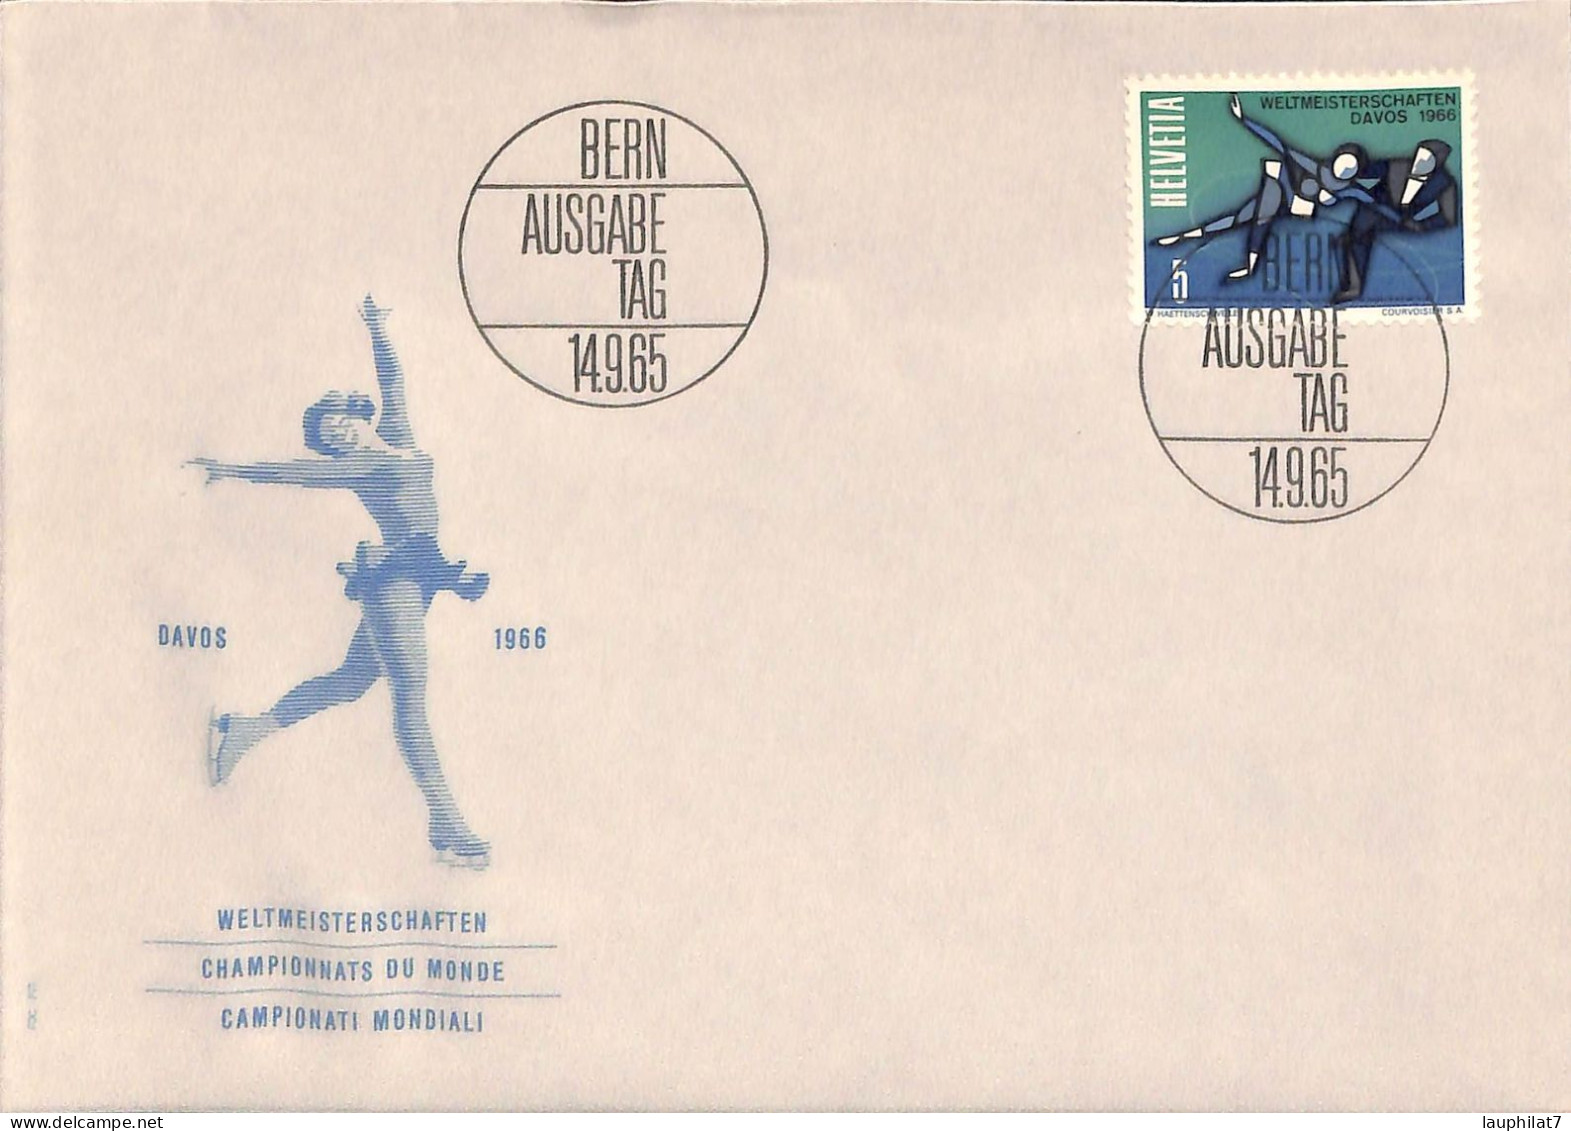 [900814]TB//-Suisse 1965 - FDC, Documents, Sports, Patinage Artistique - Figure Skating